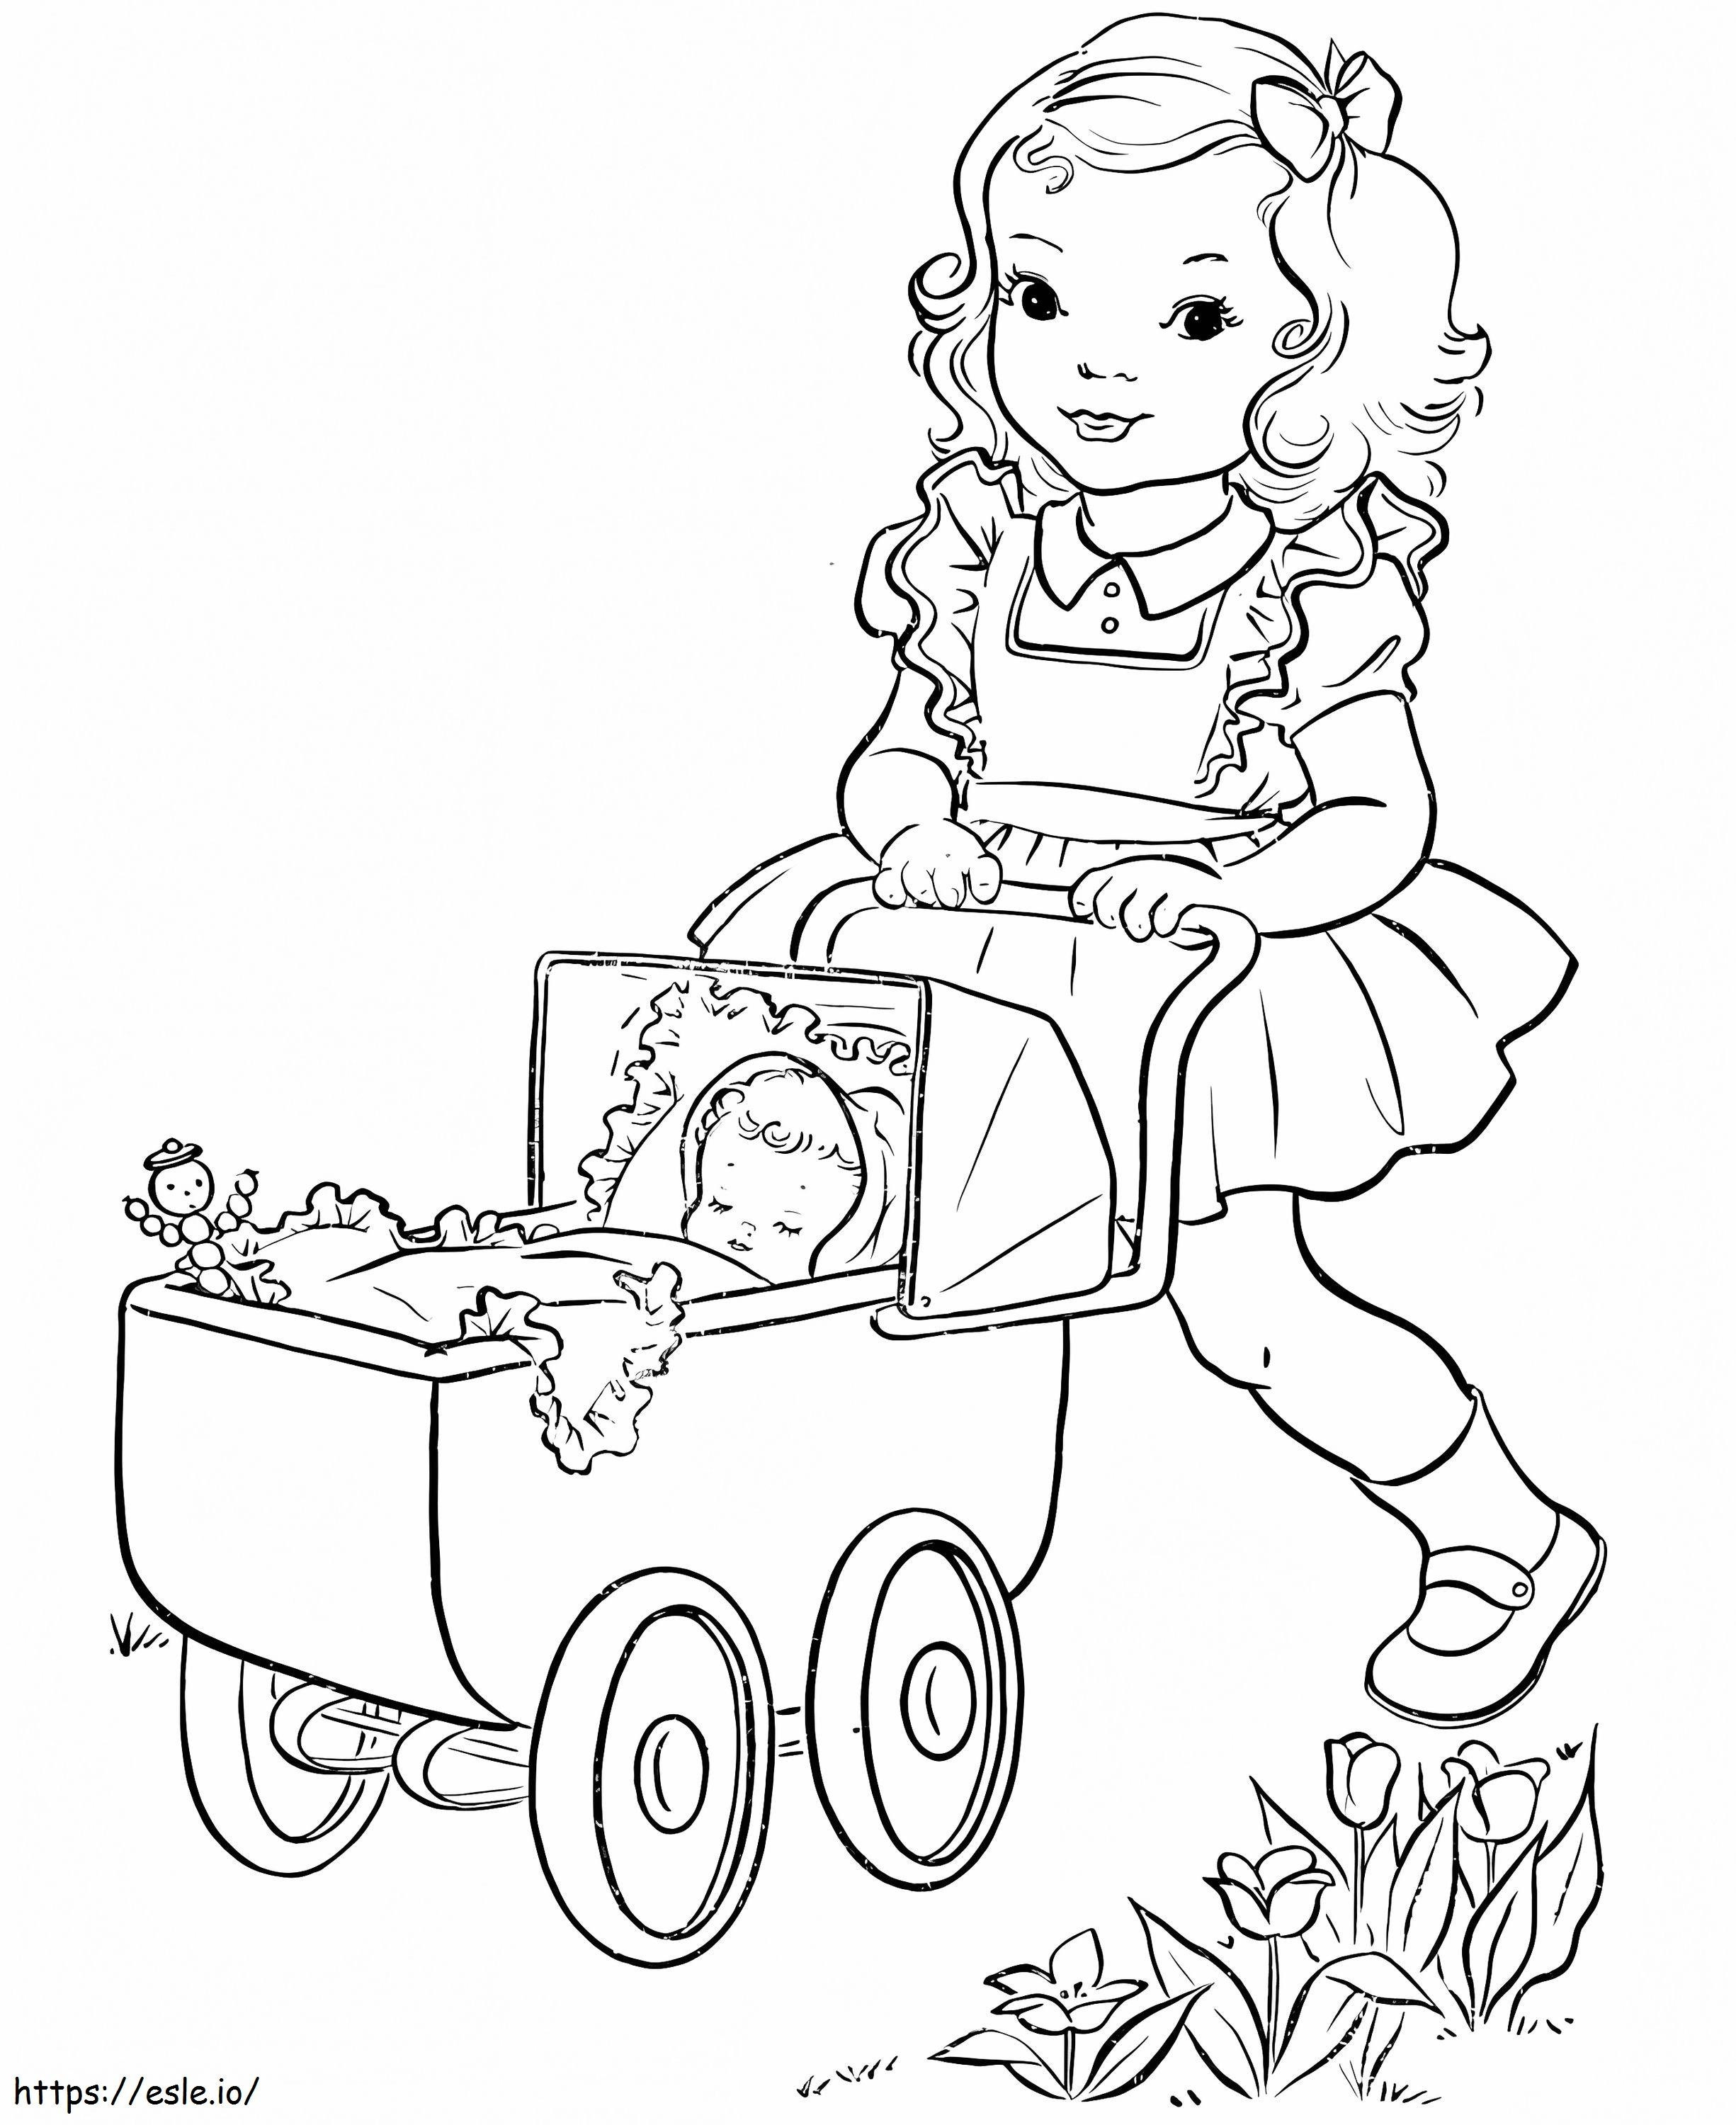 A Baby In Stroller Coloring Page coloring page